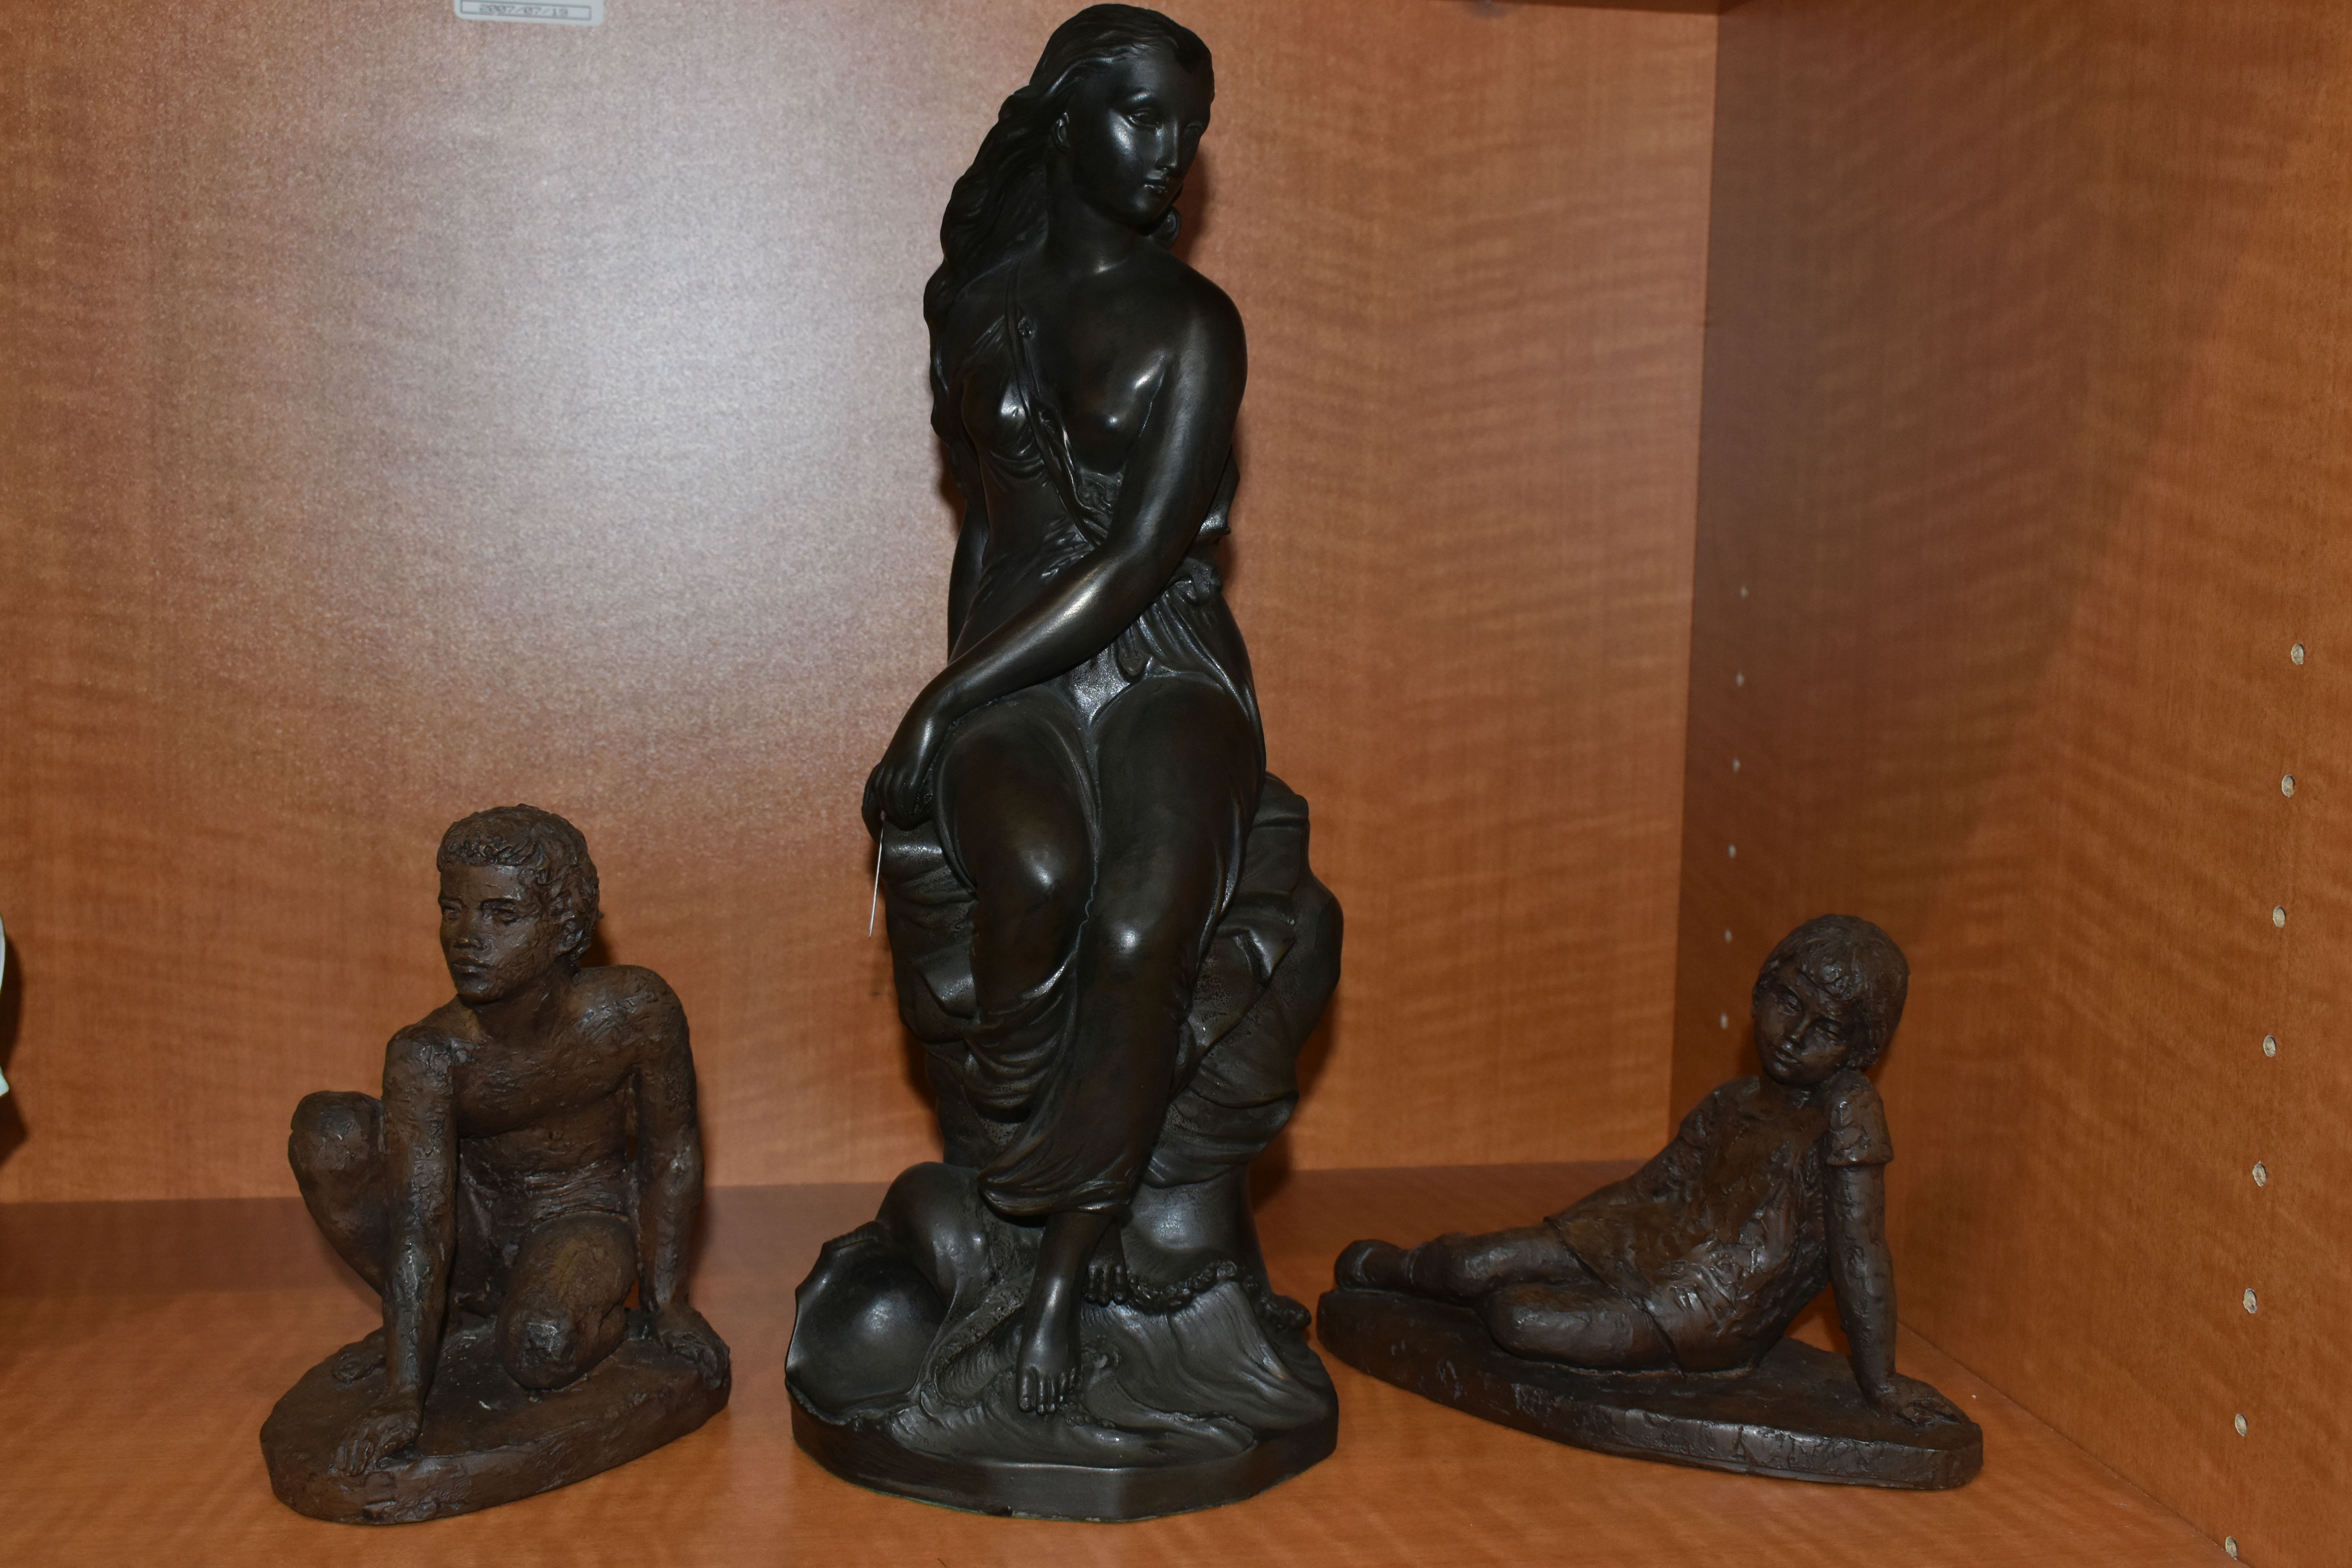 A BRONZED RESIN MODEL OF A SCANTILY CLAD SEATED CLASSICAL FEMALE AND TWO KARIN JONZEN BRONZED